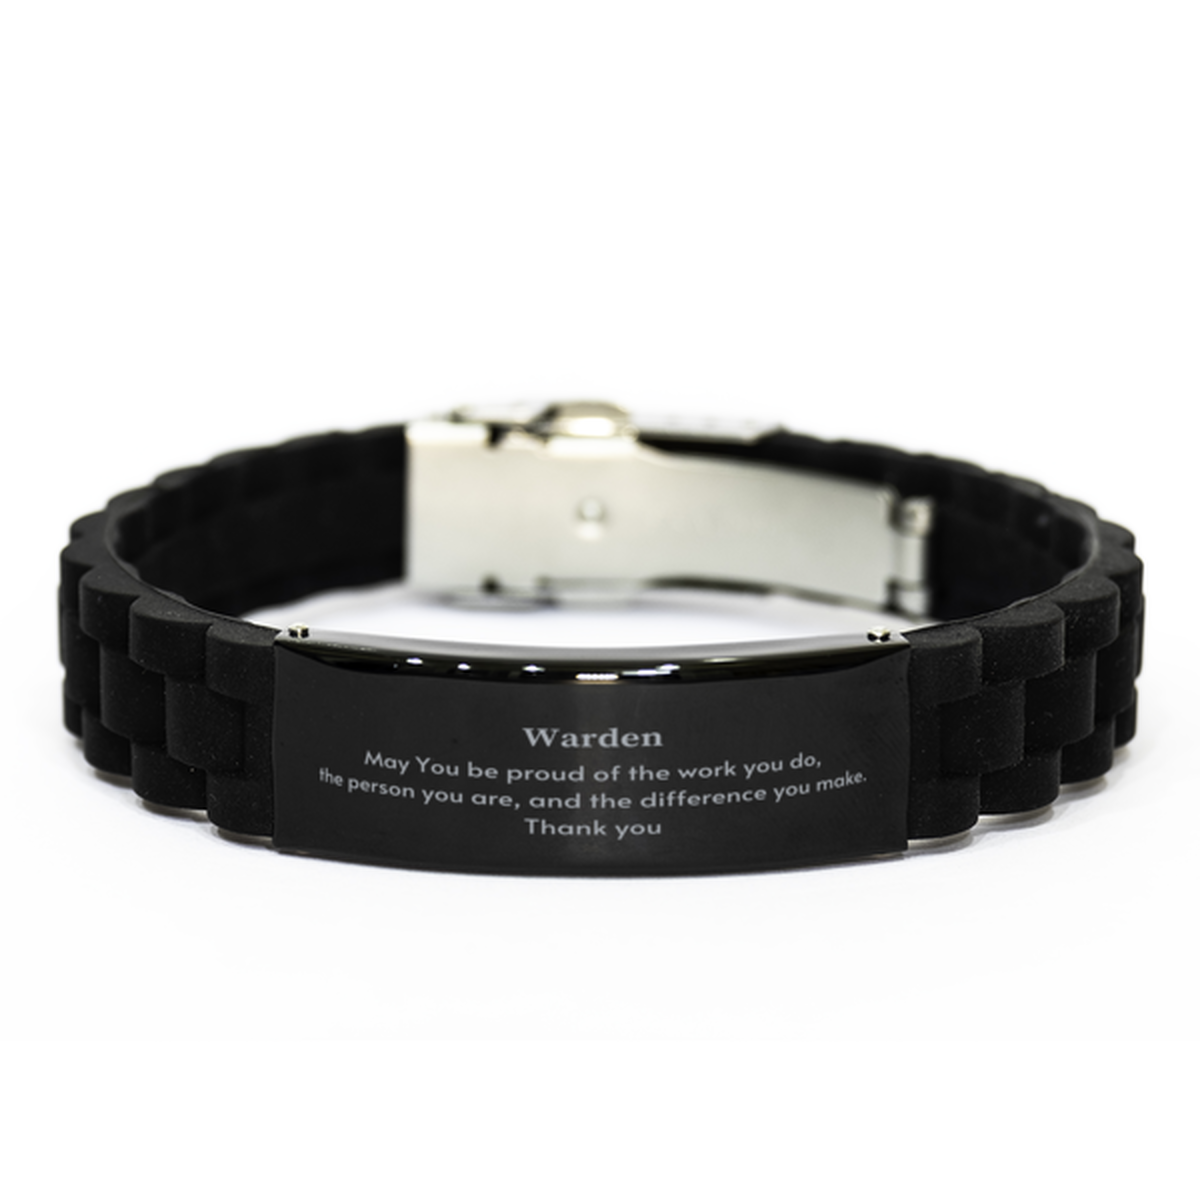 Heartwarming Black Glidelock Clasp Bracelet Retirement Coworkers Gifts for Warden, Warden May You be proud of the work you do, the person you are Gifts for Boss Men Women Friends